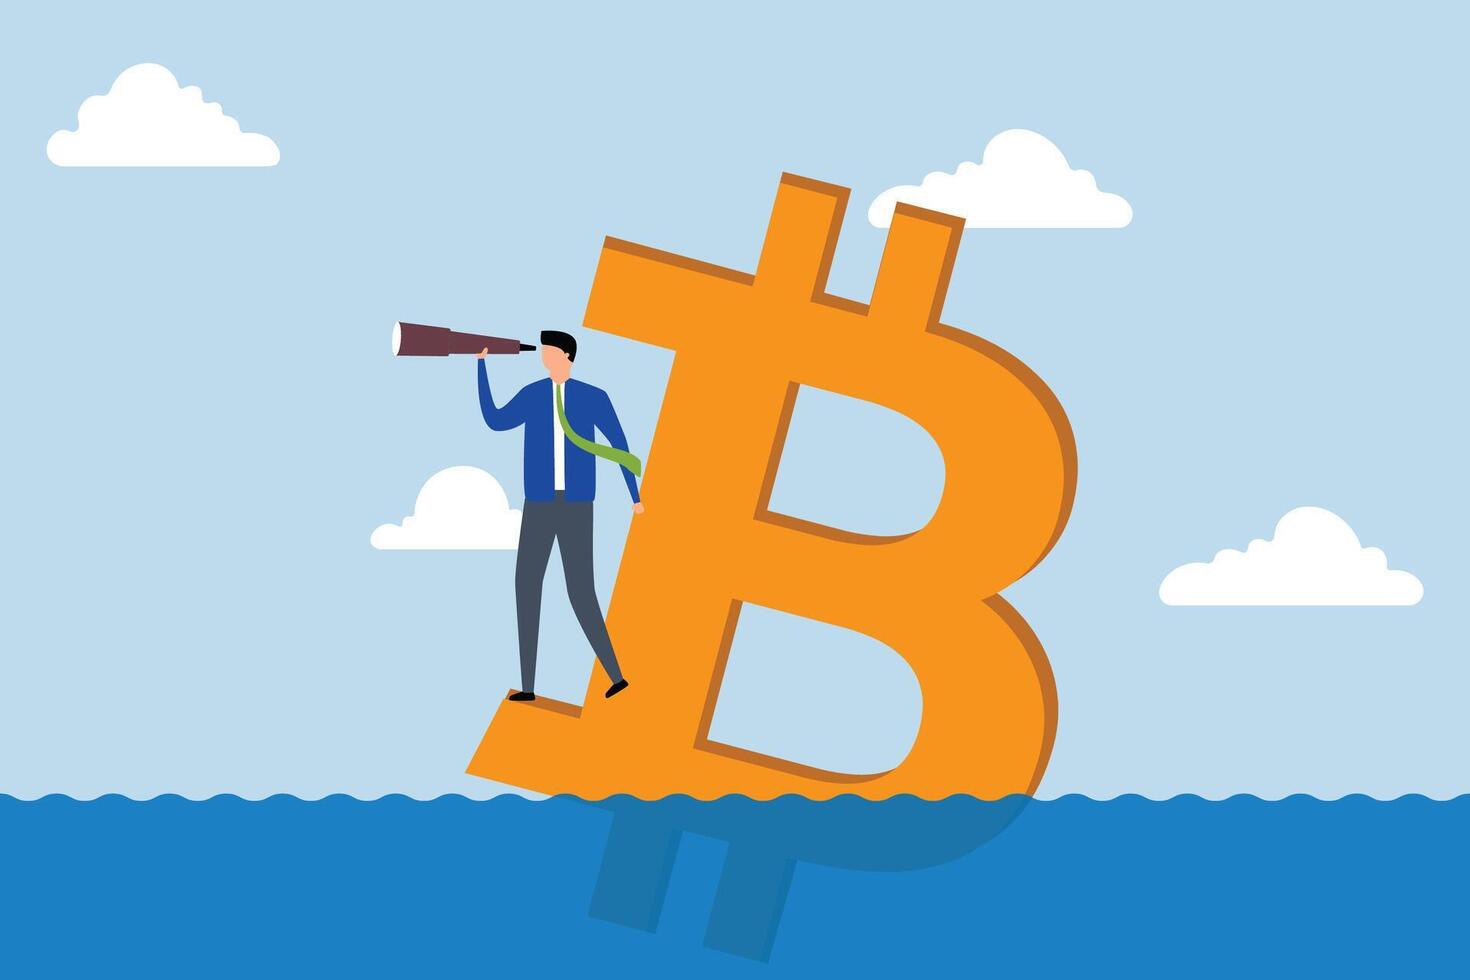 Bitcoin price down, investor stands with telescope sinking bitcoin symbol to see the future. vector